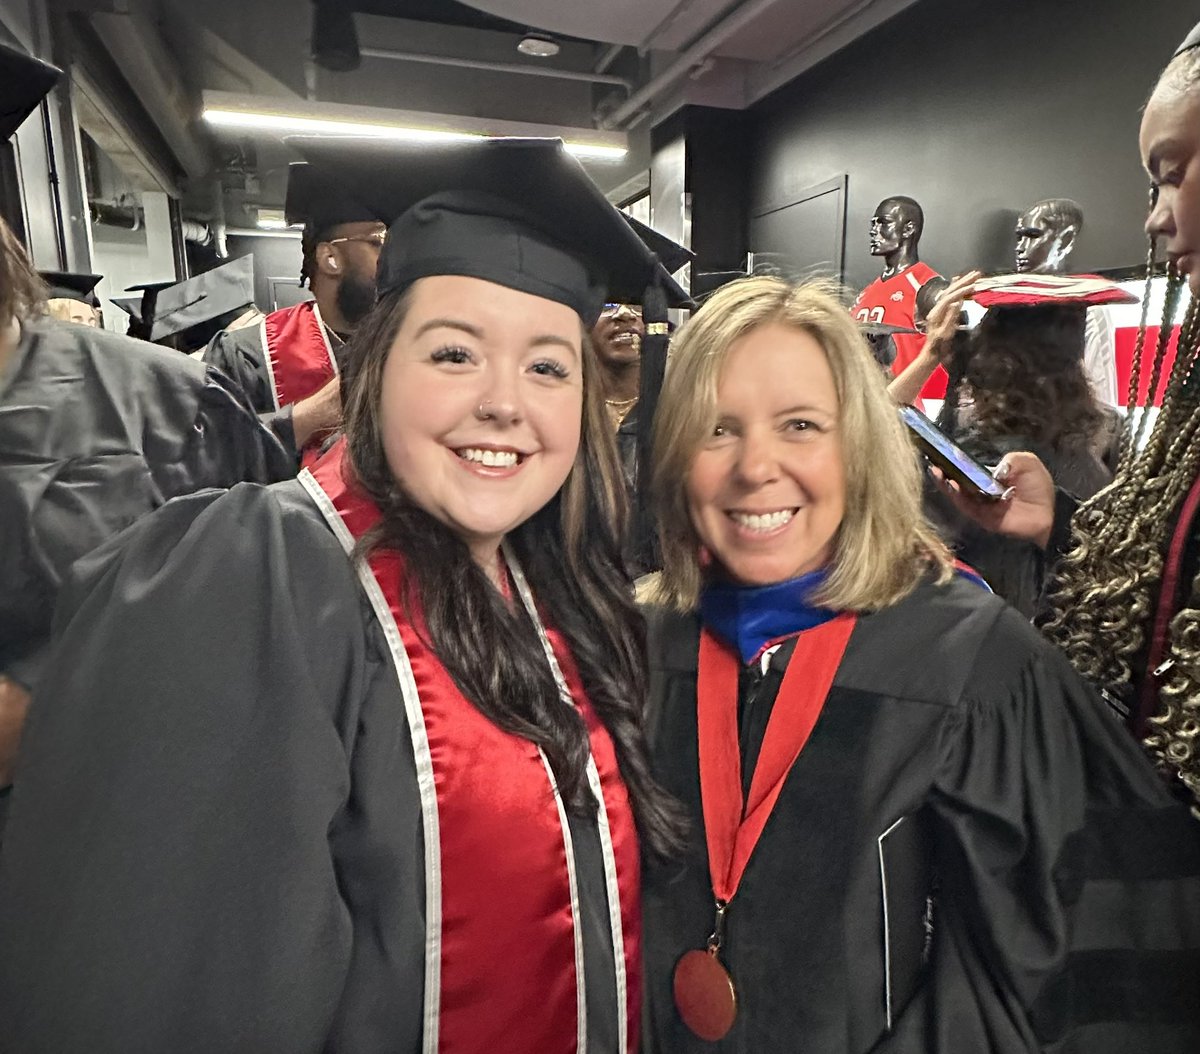 Allison, one of our @Cayci_OSU field practicum students graduated tonight. She’s learned so much in her field placement @DublinSchools & is ready for an awesome school social work job!@osucsw